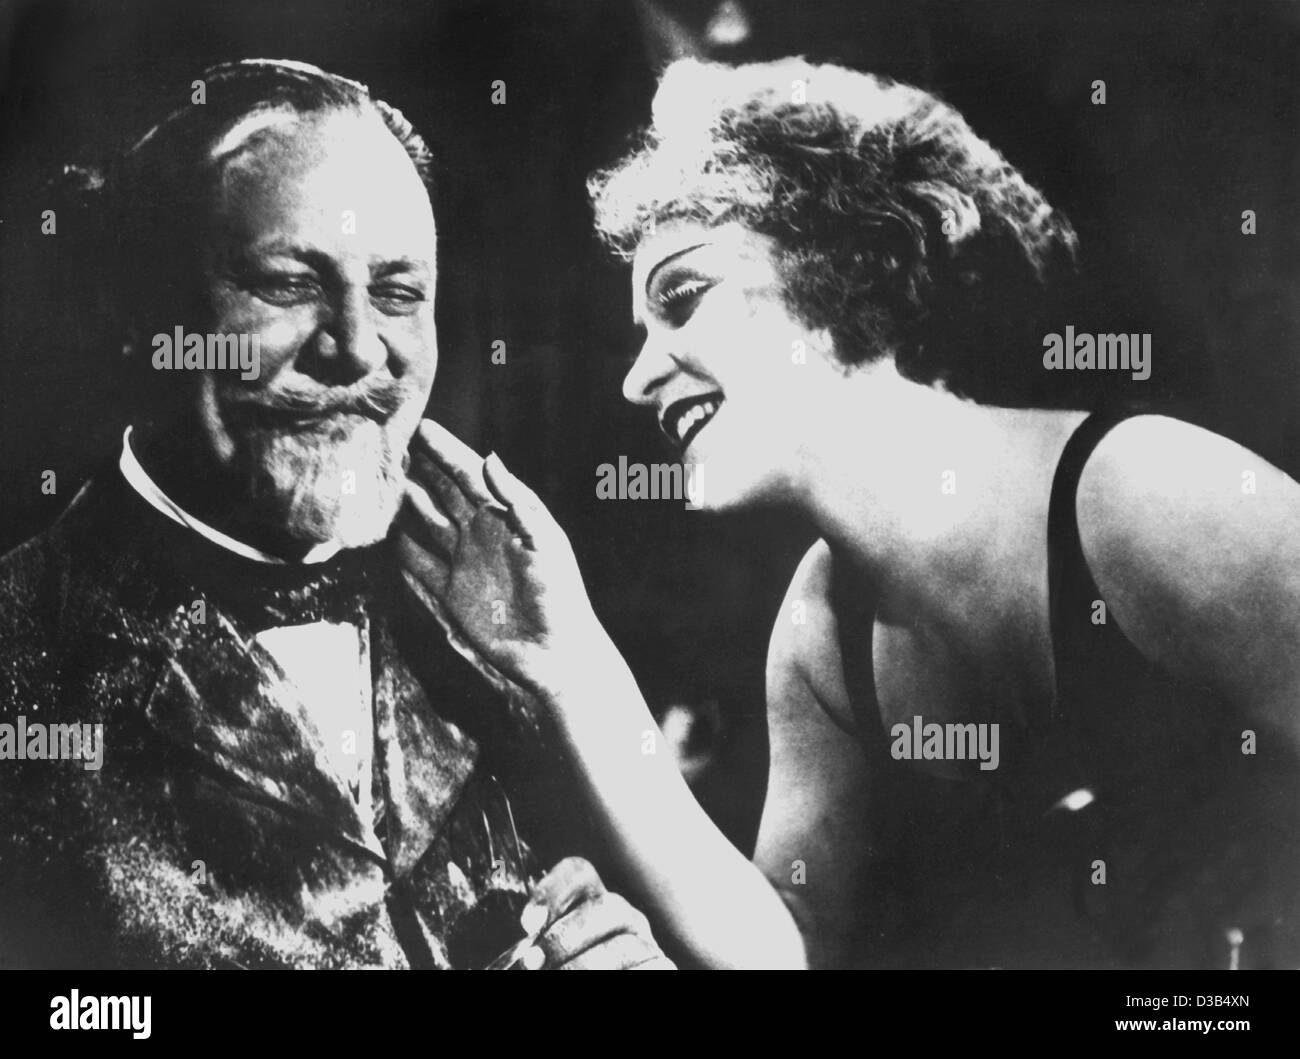 (dpa files) - Lola-Lola (Marlene Dietrich) bewitches Professor Unrat (Emil Jannings) in the Ufa production 'The Blue Angel' ('Der Blaue Engel'), Germany, 1929. The film was Dietrich's breakthrough to world stardom. Stock Photo